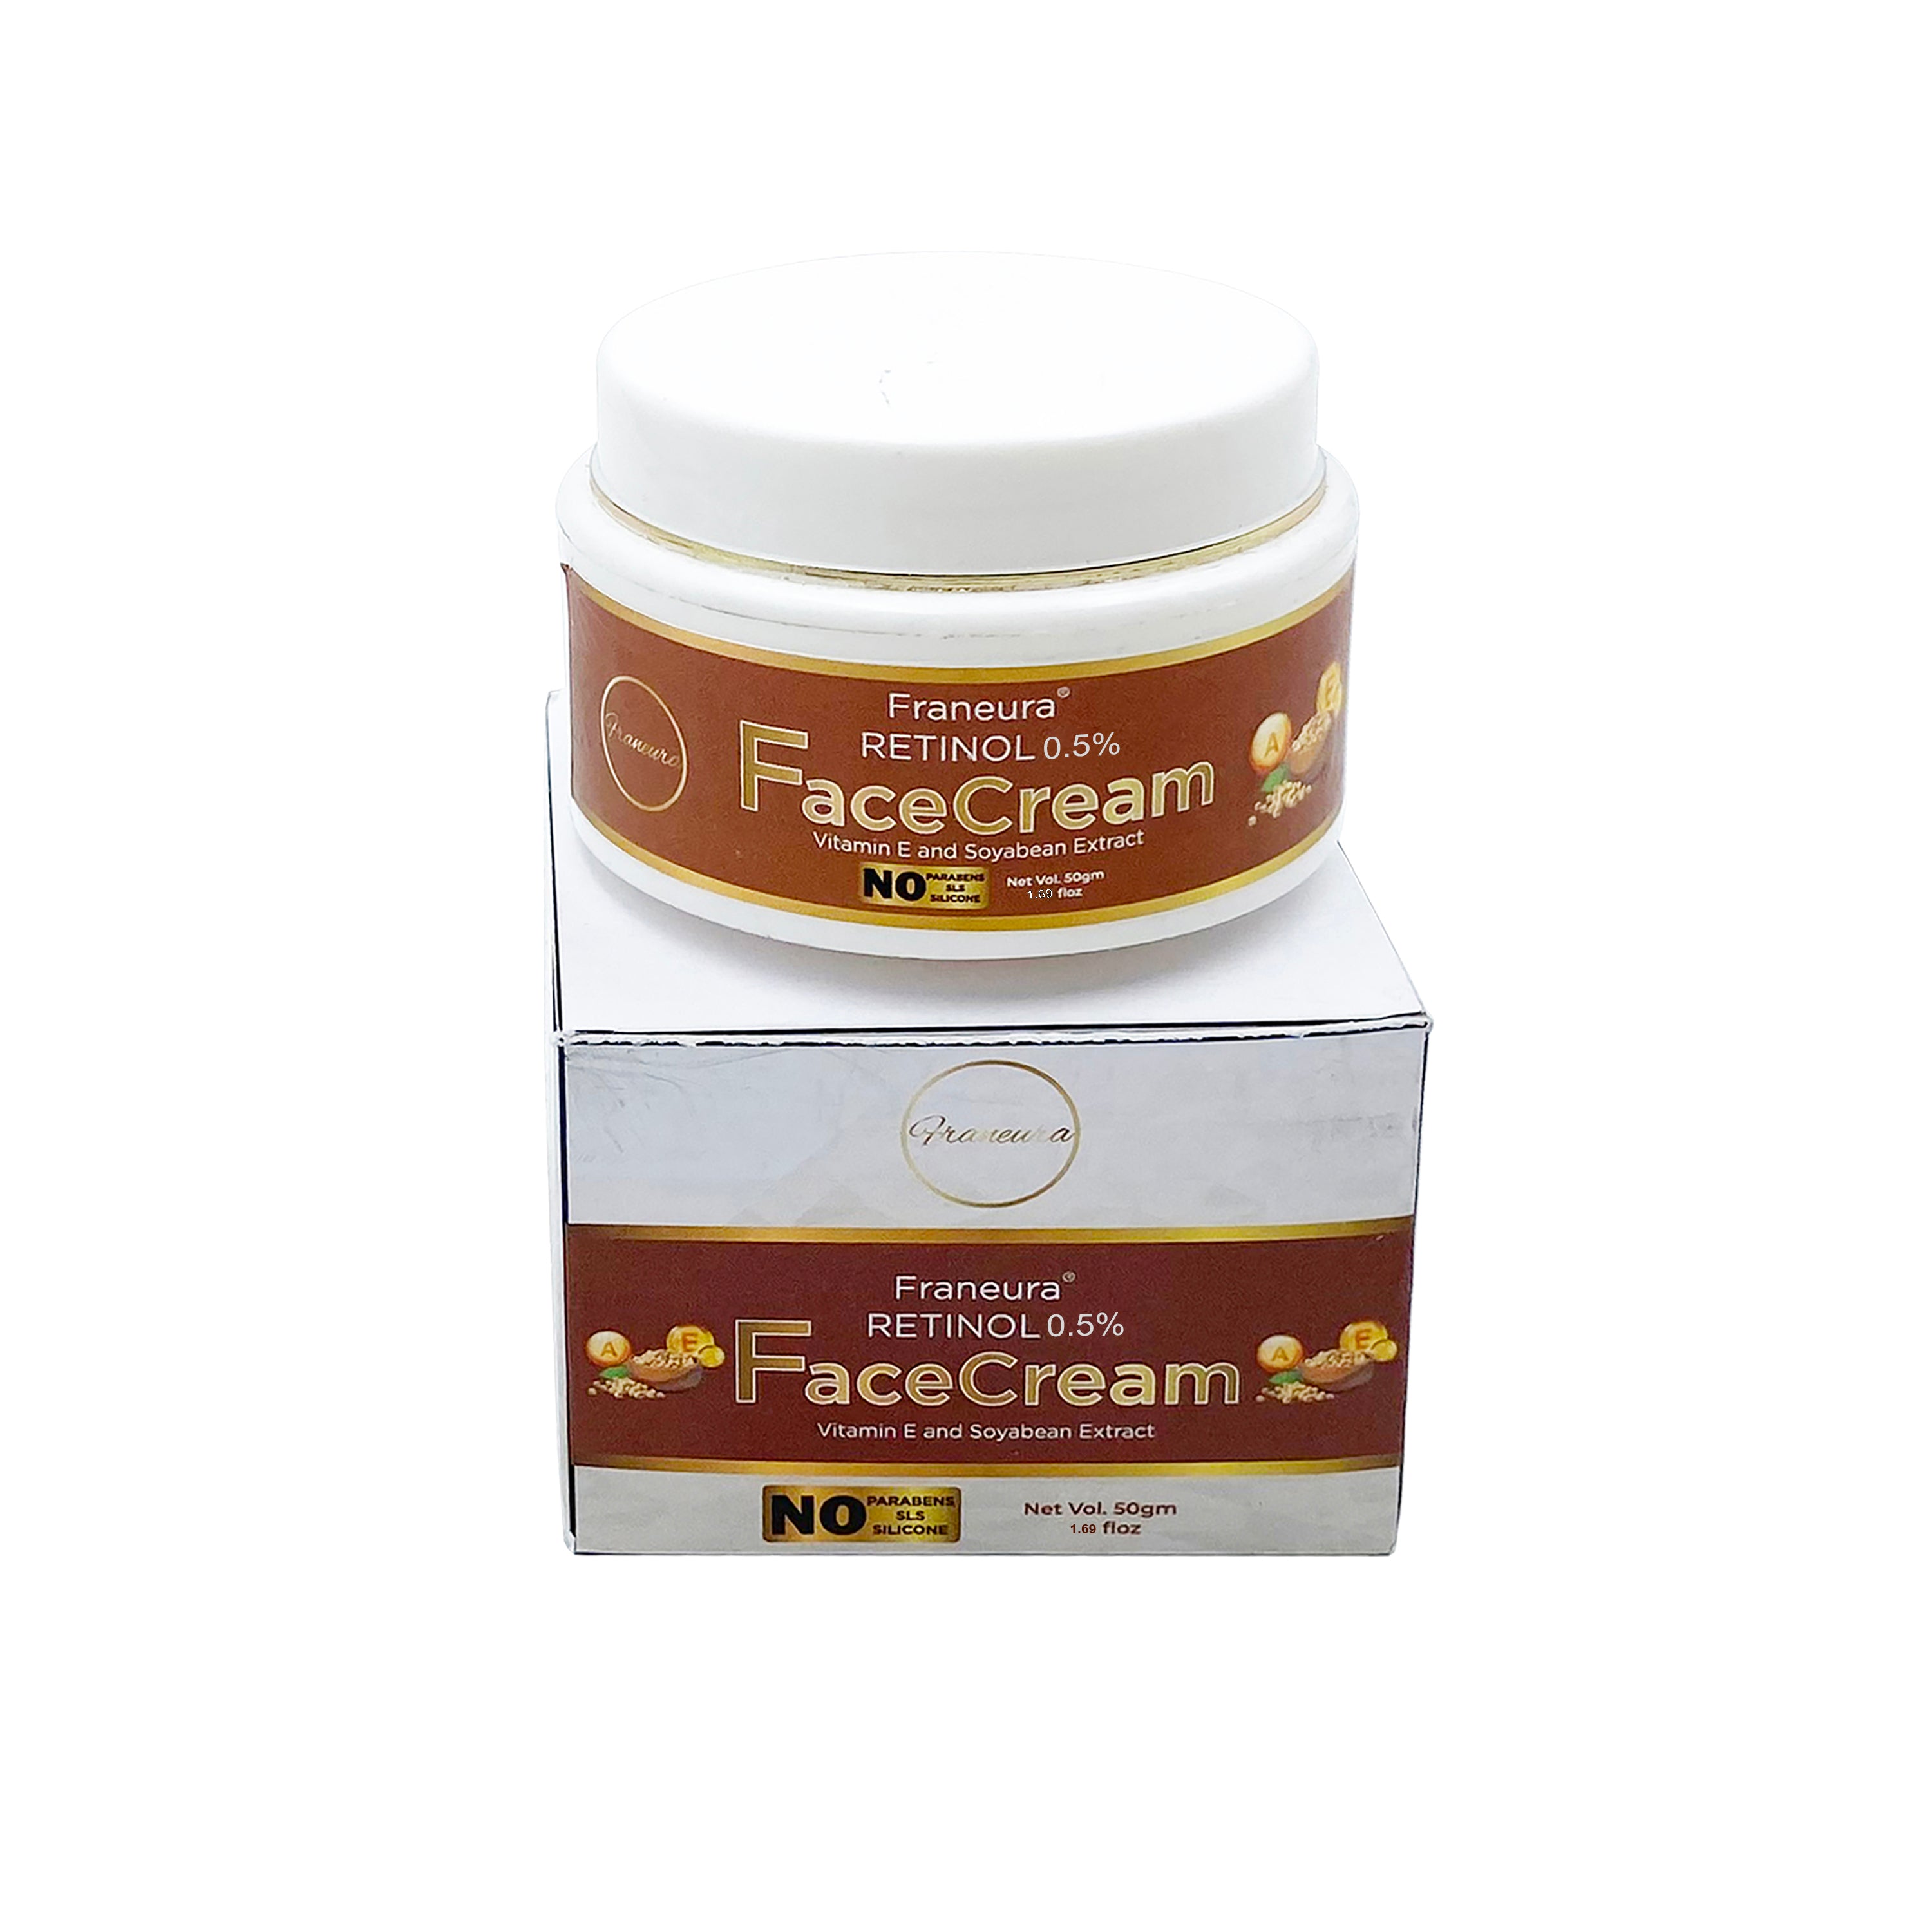 Franeura From Hair to Face: Natural Coffee Shampoo and Retinol Face Cream for Complete Revitalization